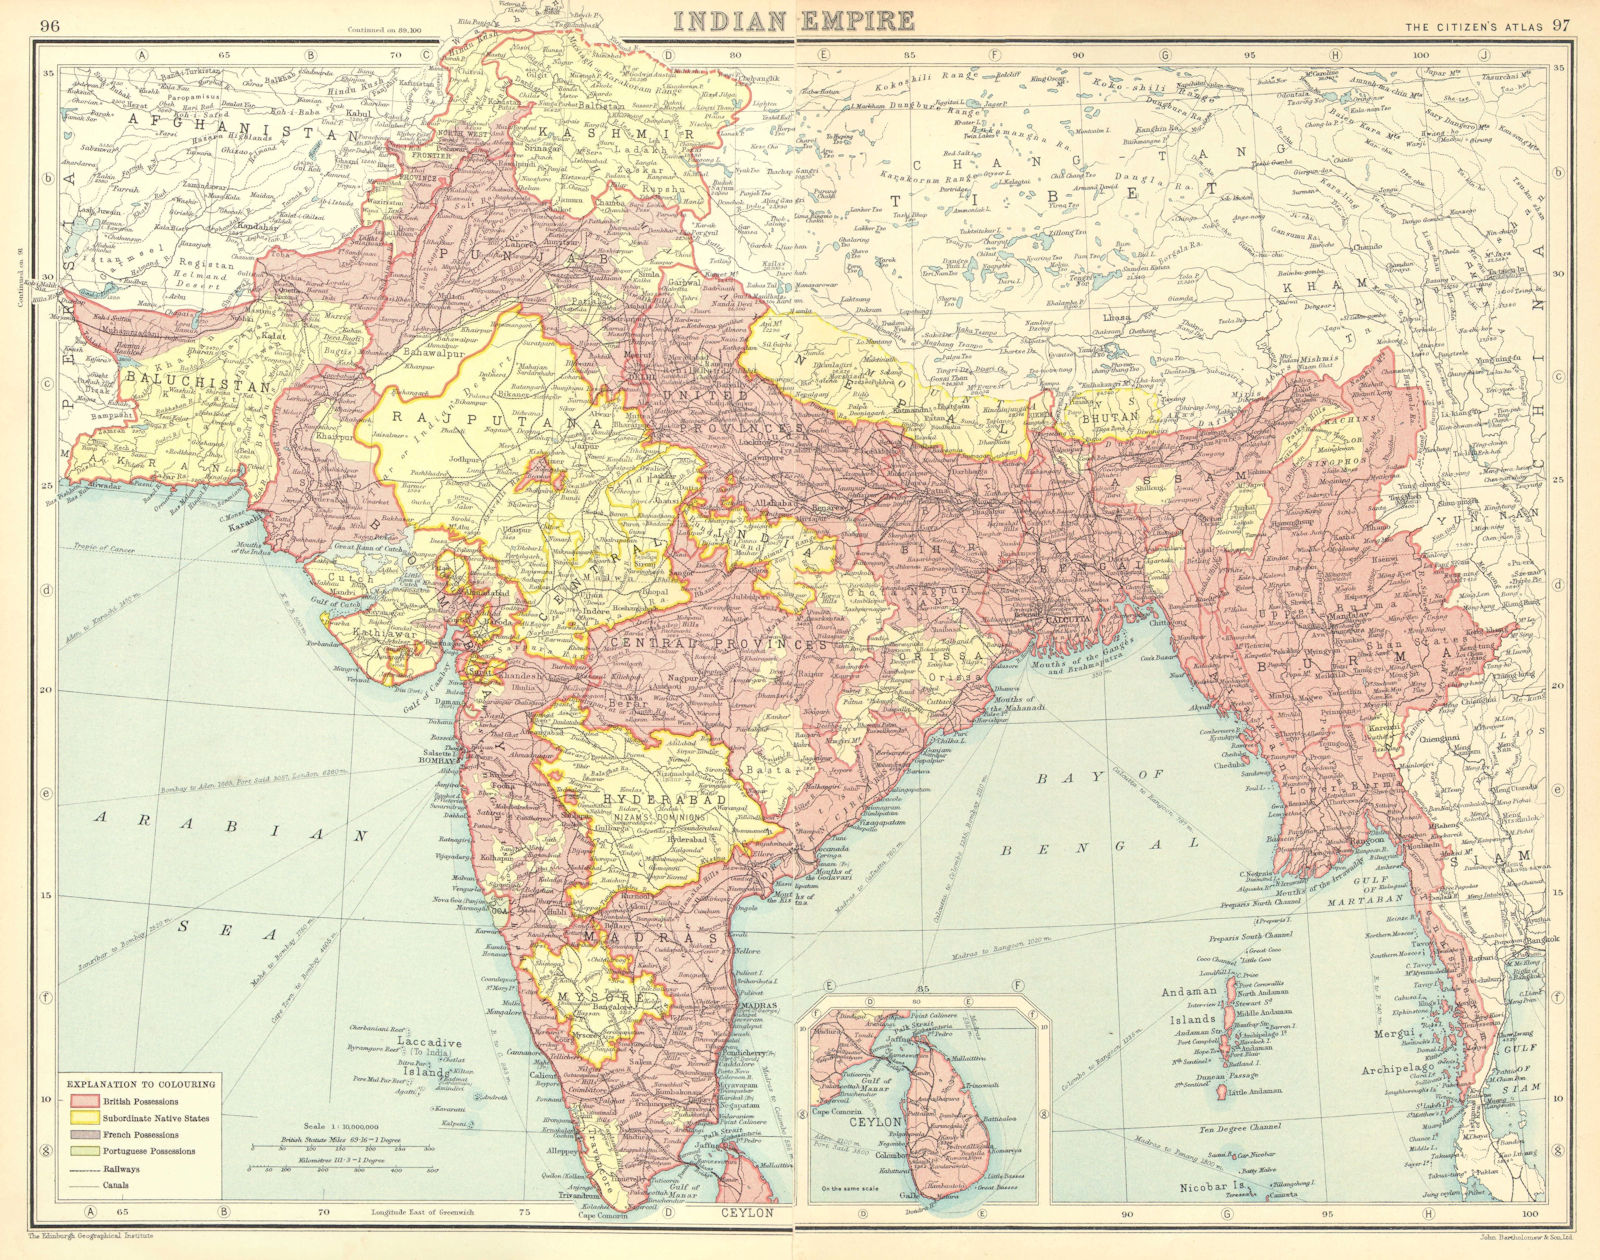 BRITISH INDIA. showing "native States", French & Portuguese possessions 1924 map